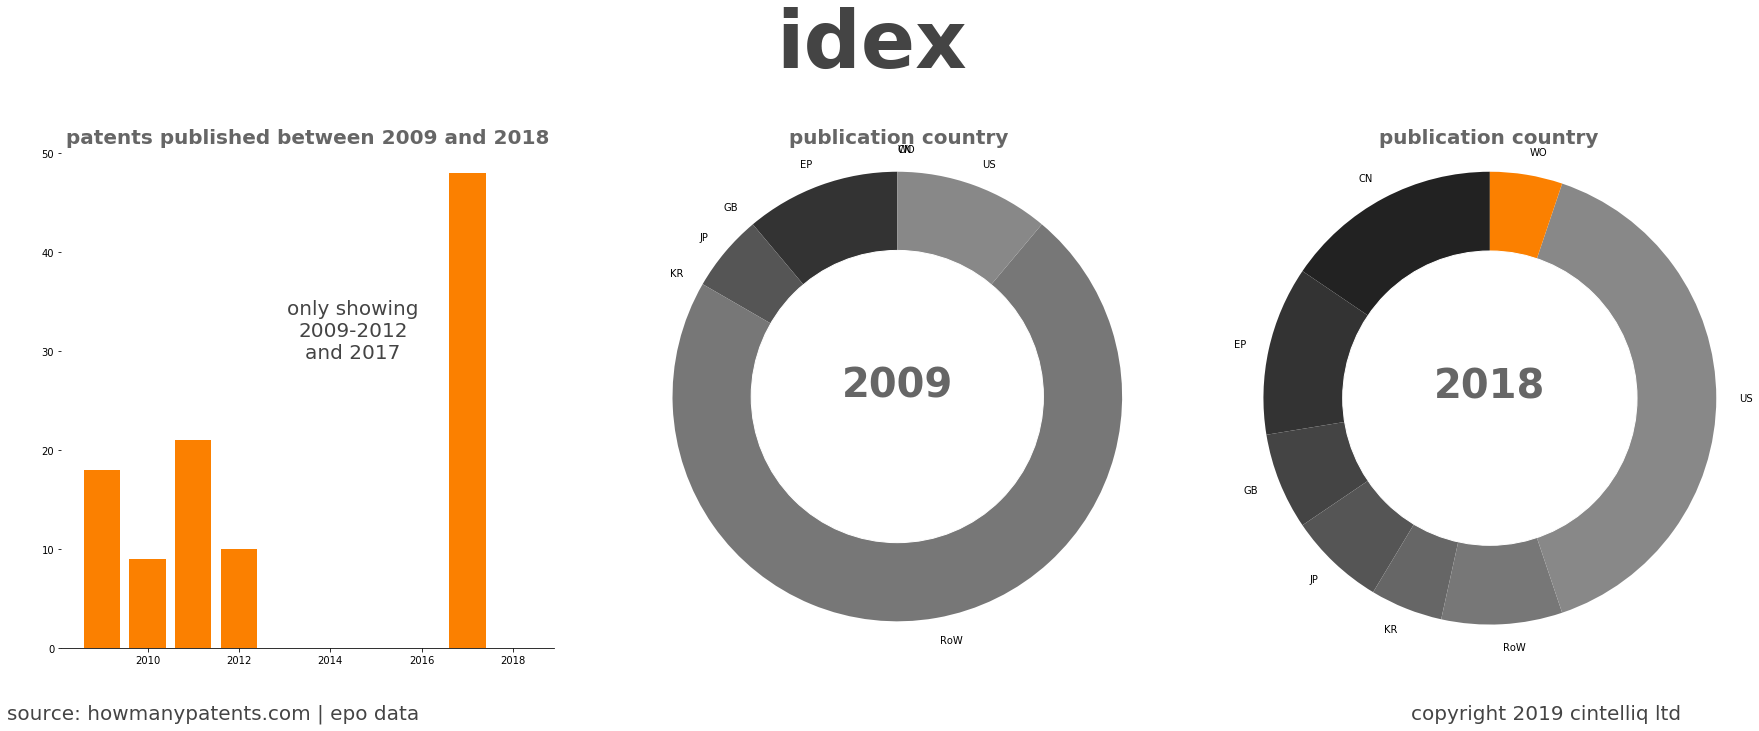 summary of patents for Idex